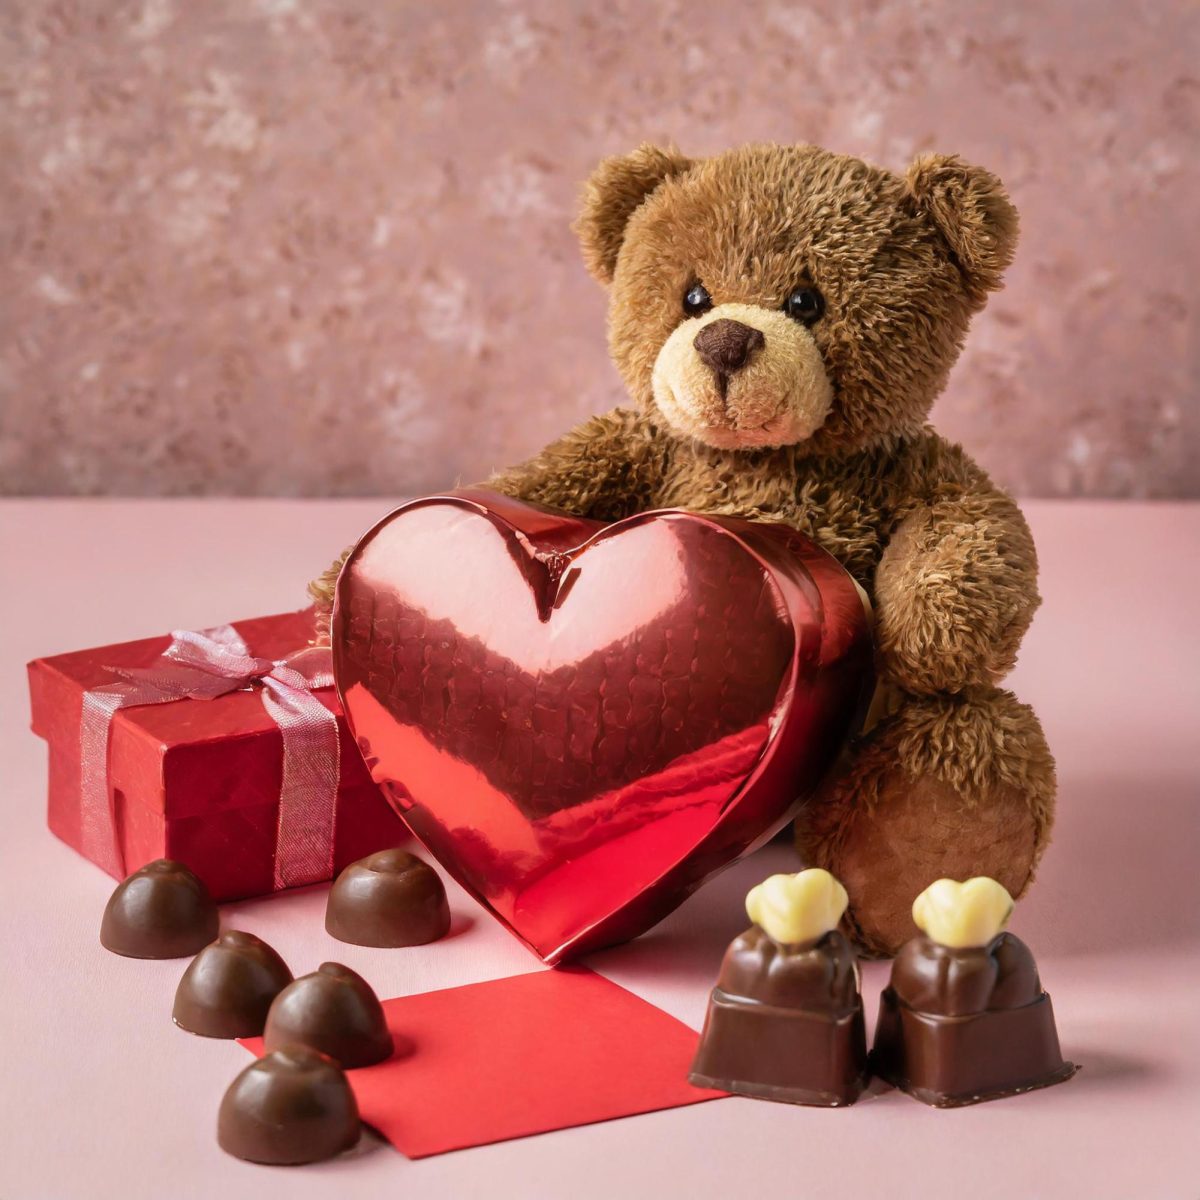 Firefly A red shiny heart-shaped chocolate box, a teddy bear, a red card, and some chocolate standin